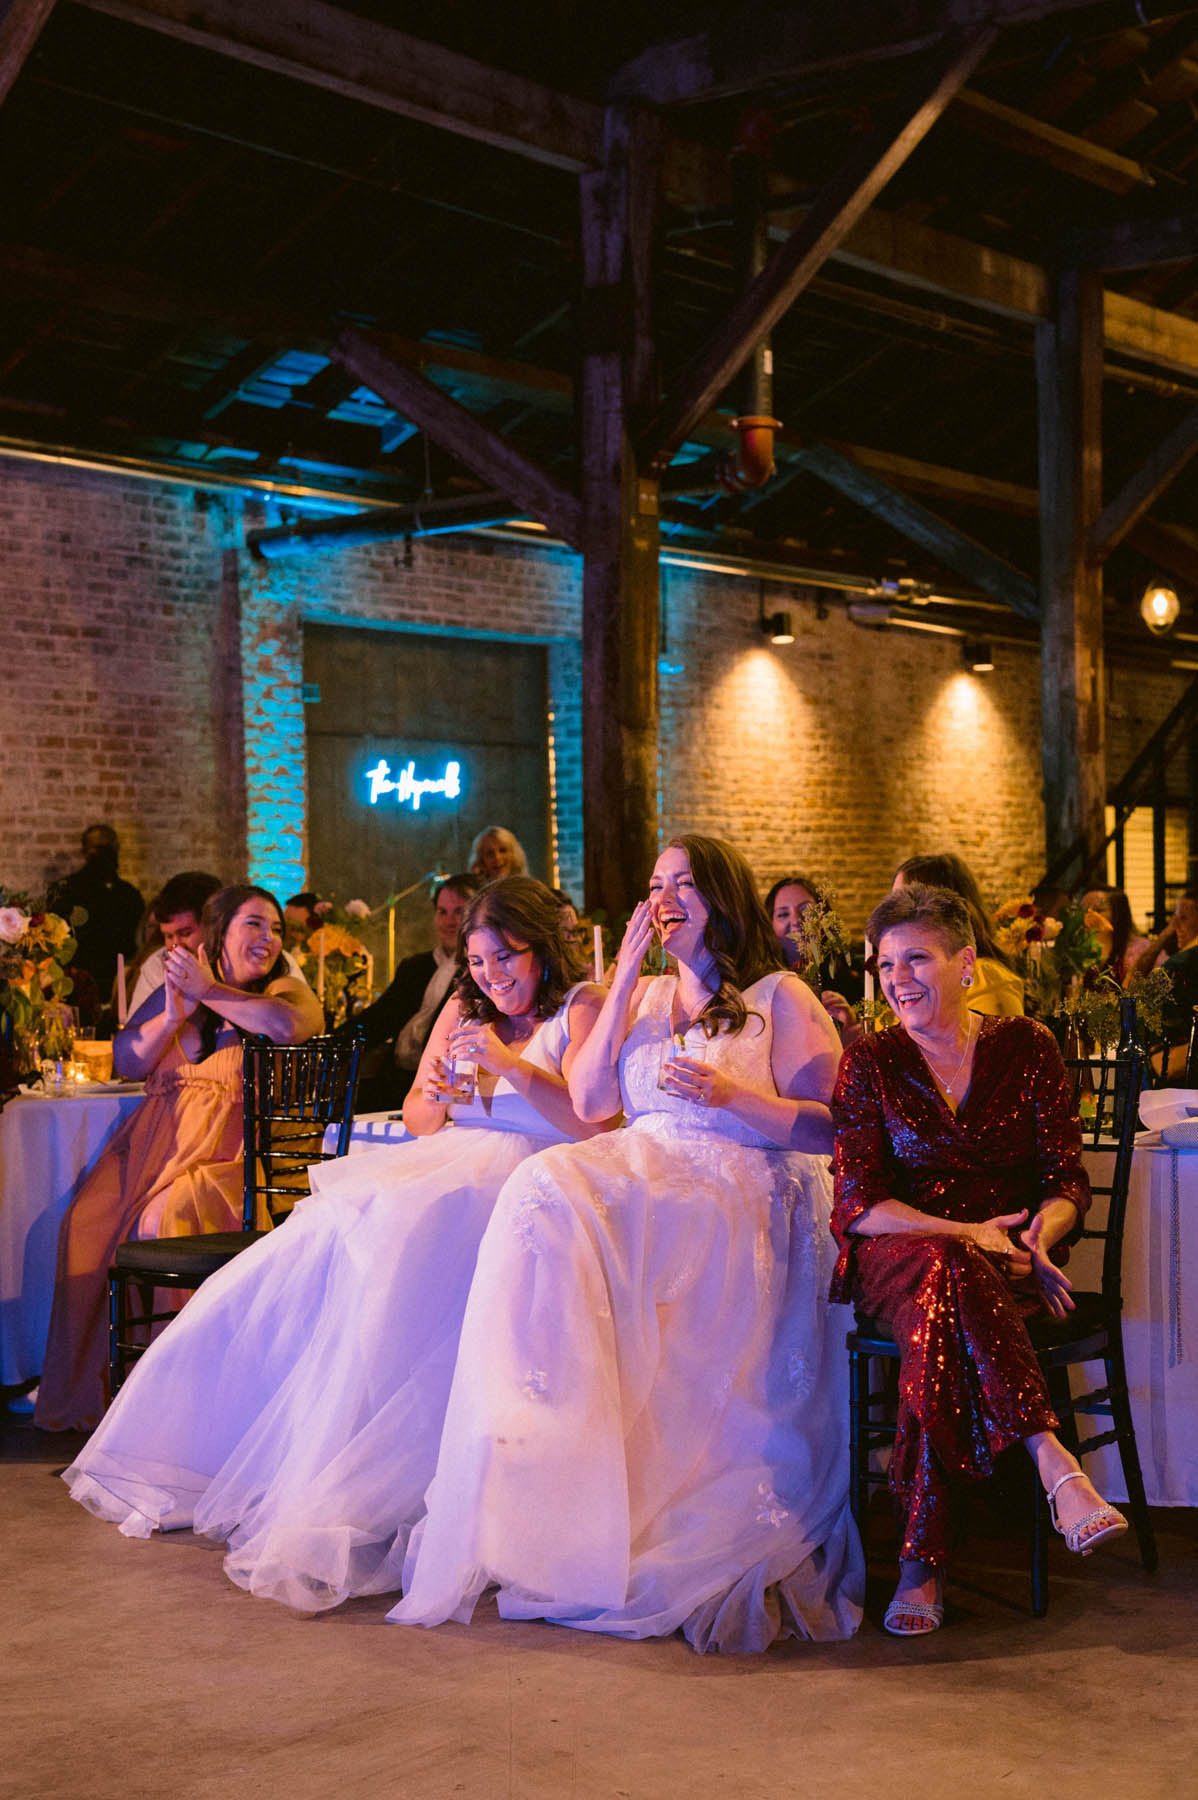 The newlyweds sit and laugh as someone gives a toast. They are in a brick and wooden loft building.